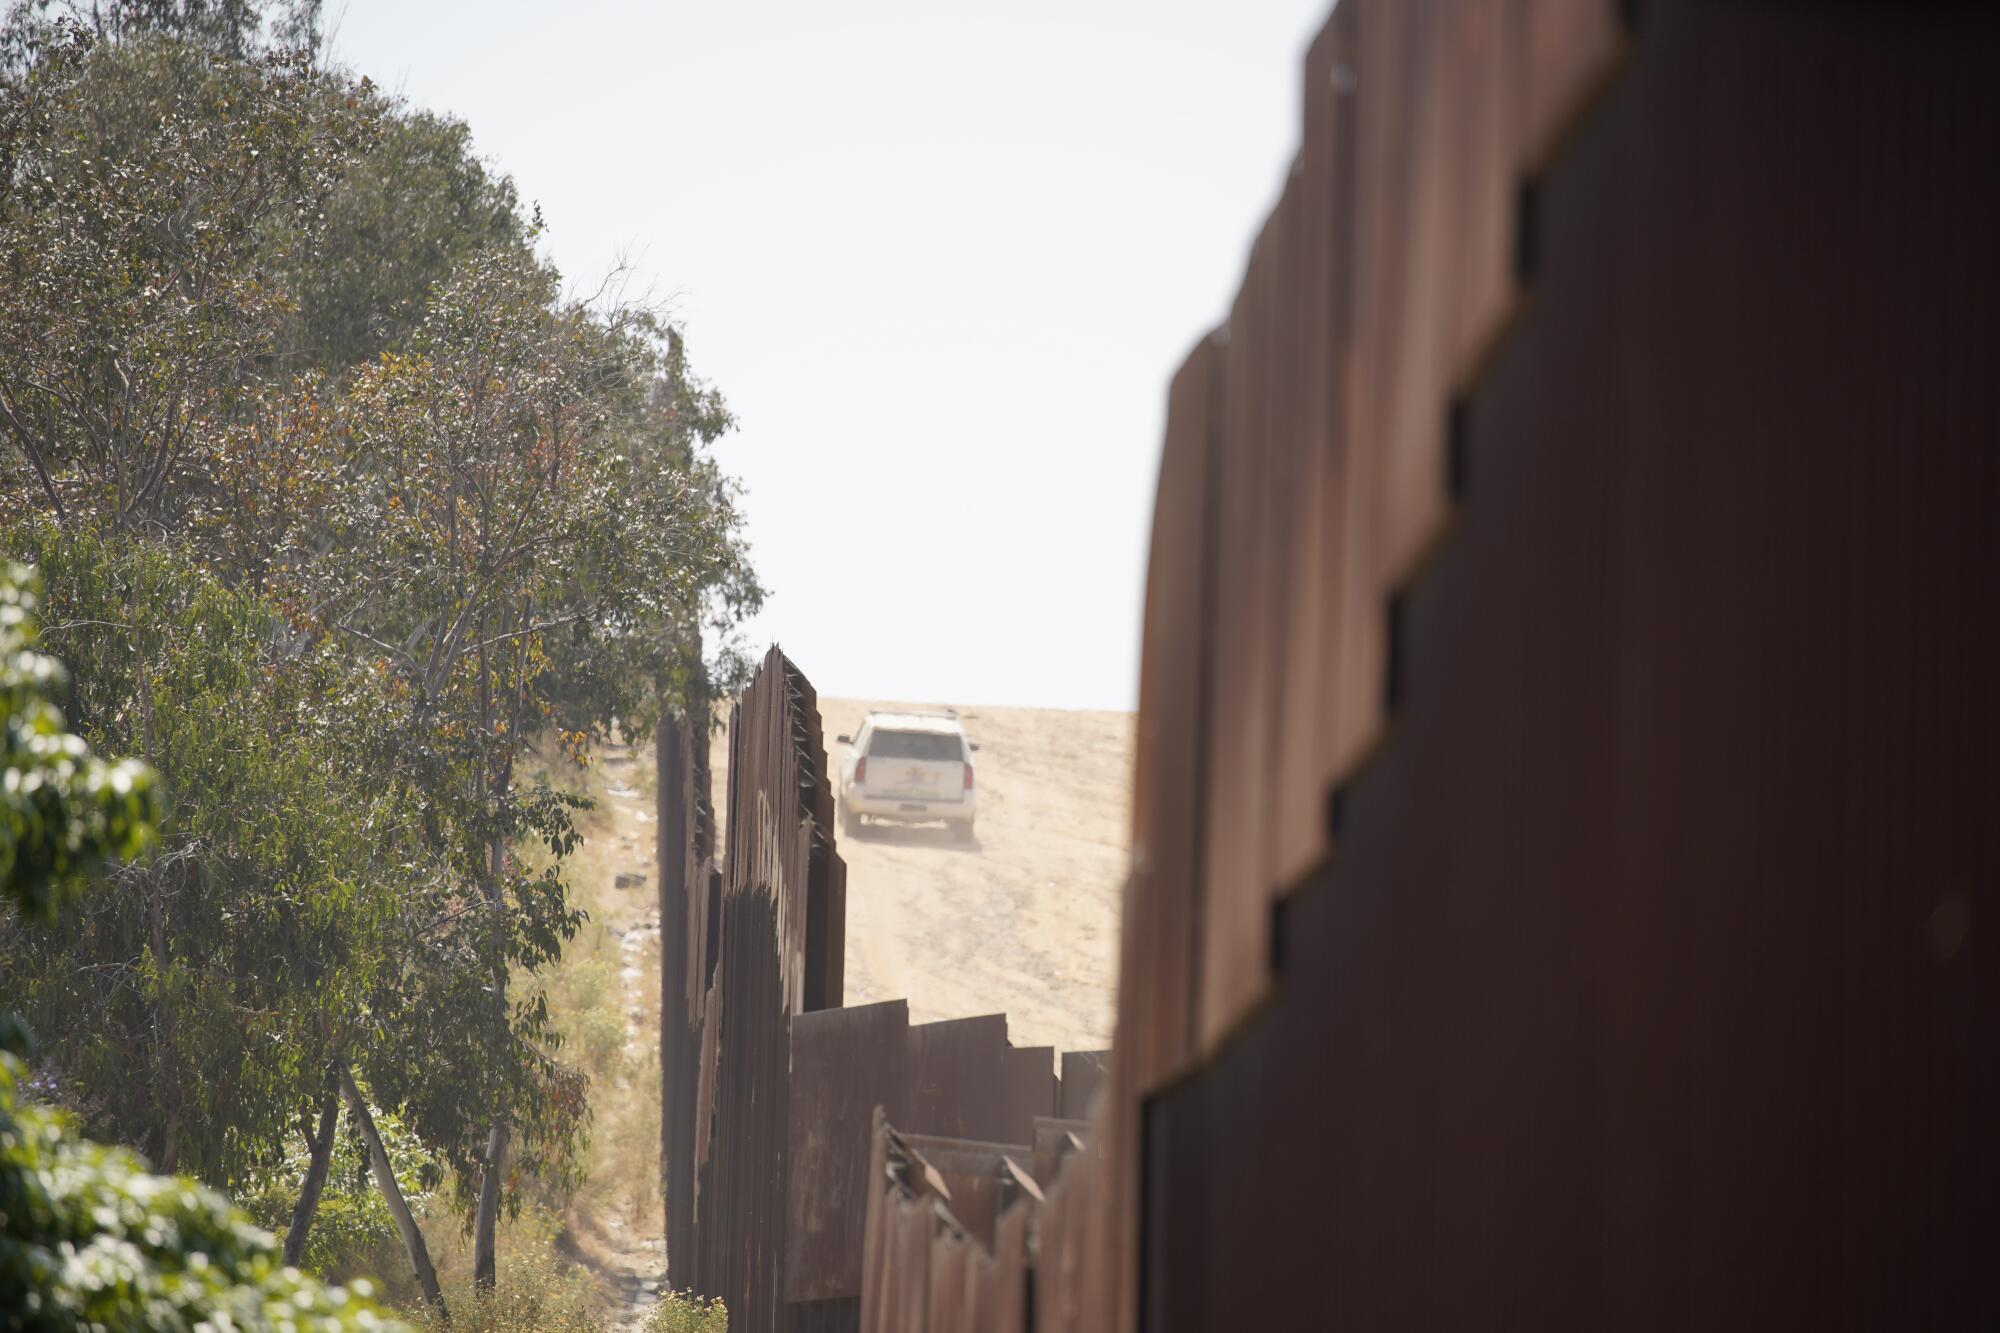 The view from Colonia Soler in Tijuana, where a Border Patrol vehicle drives along the U.S. side of the border fence.